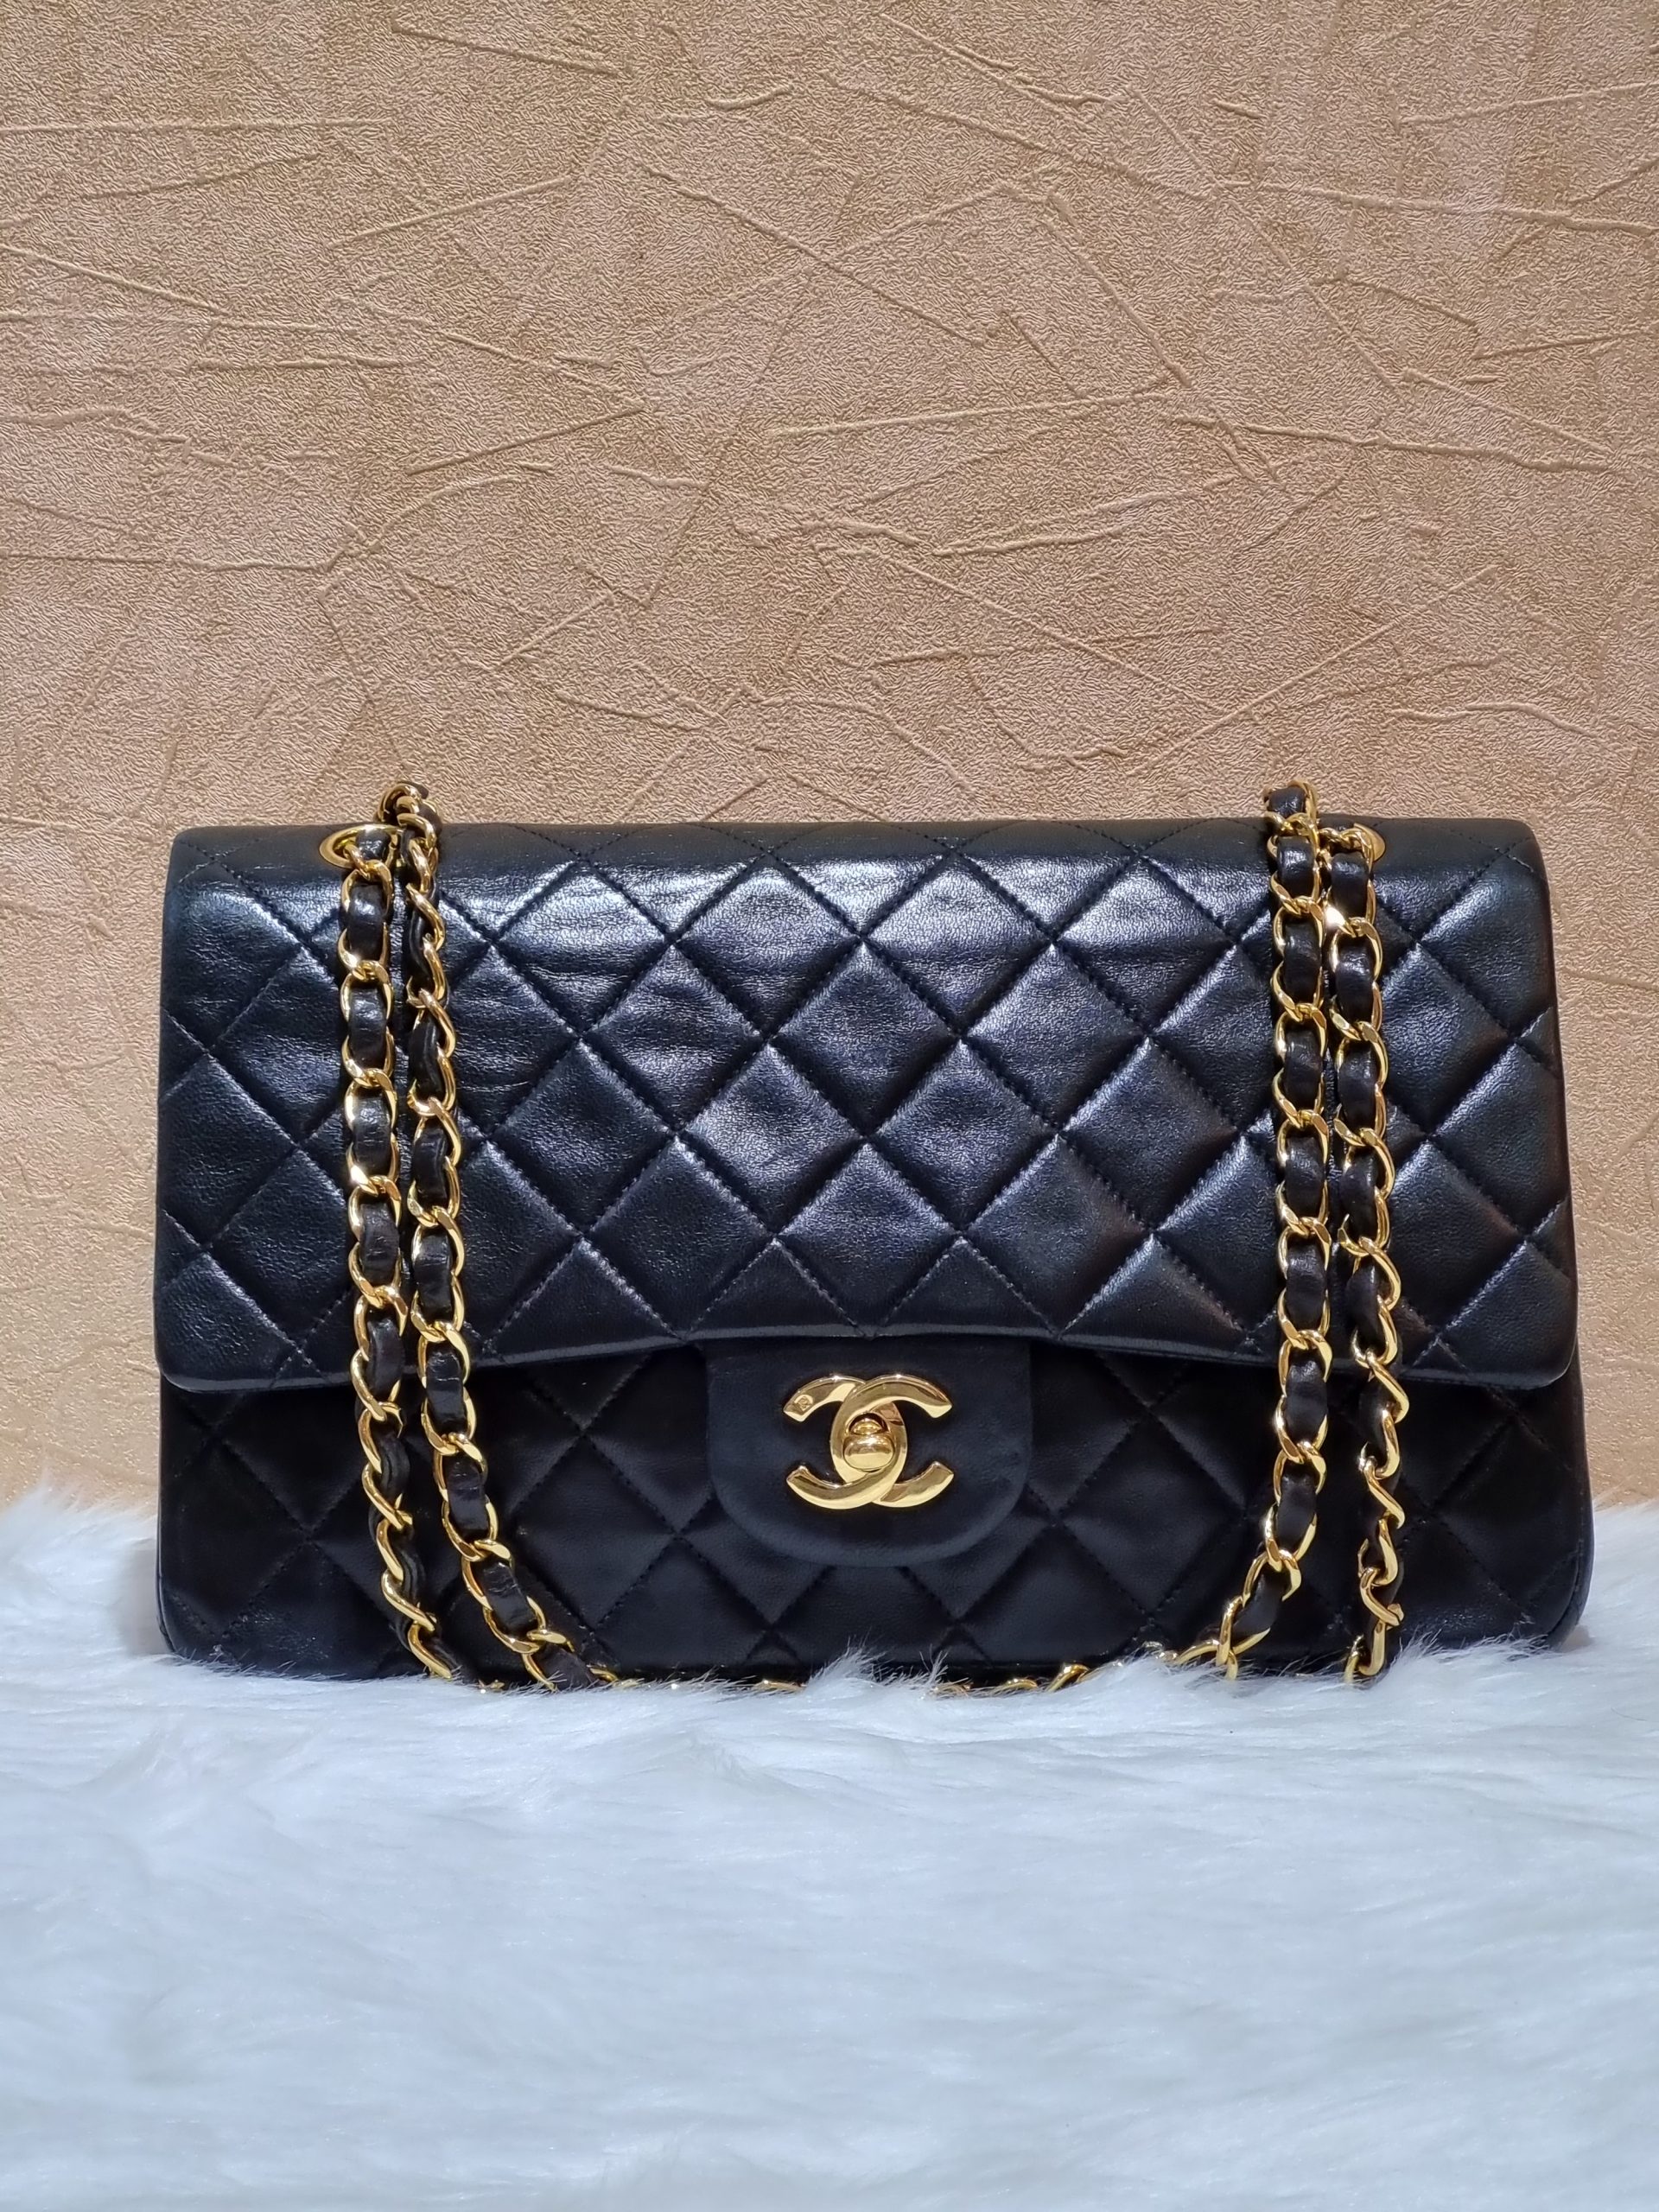 Vintage CHANEL Beige and Black Frame Lambskin 2.55 Classic 